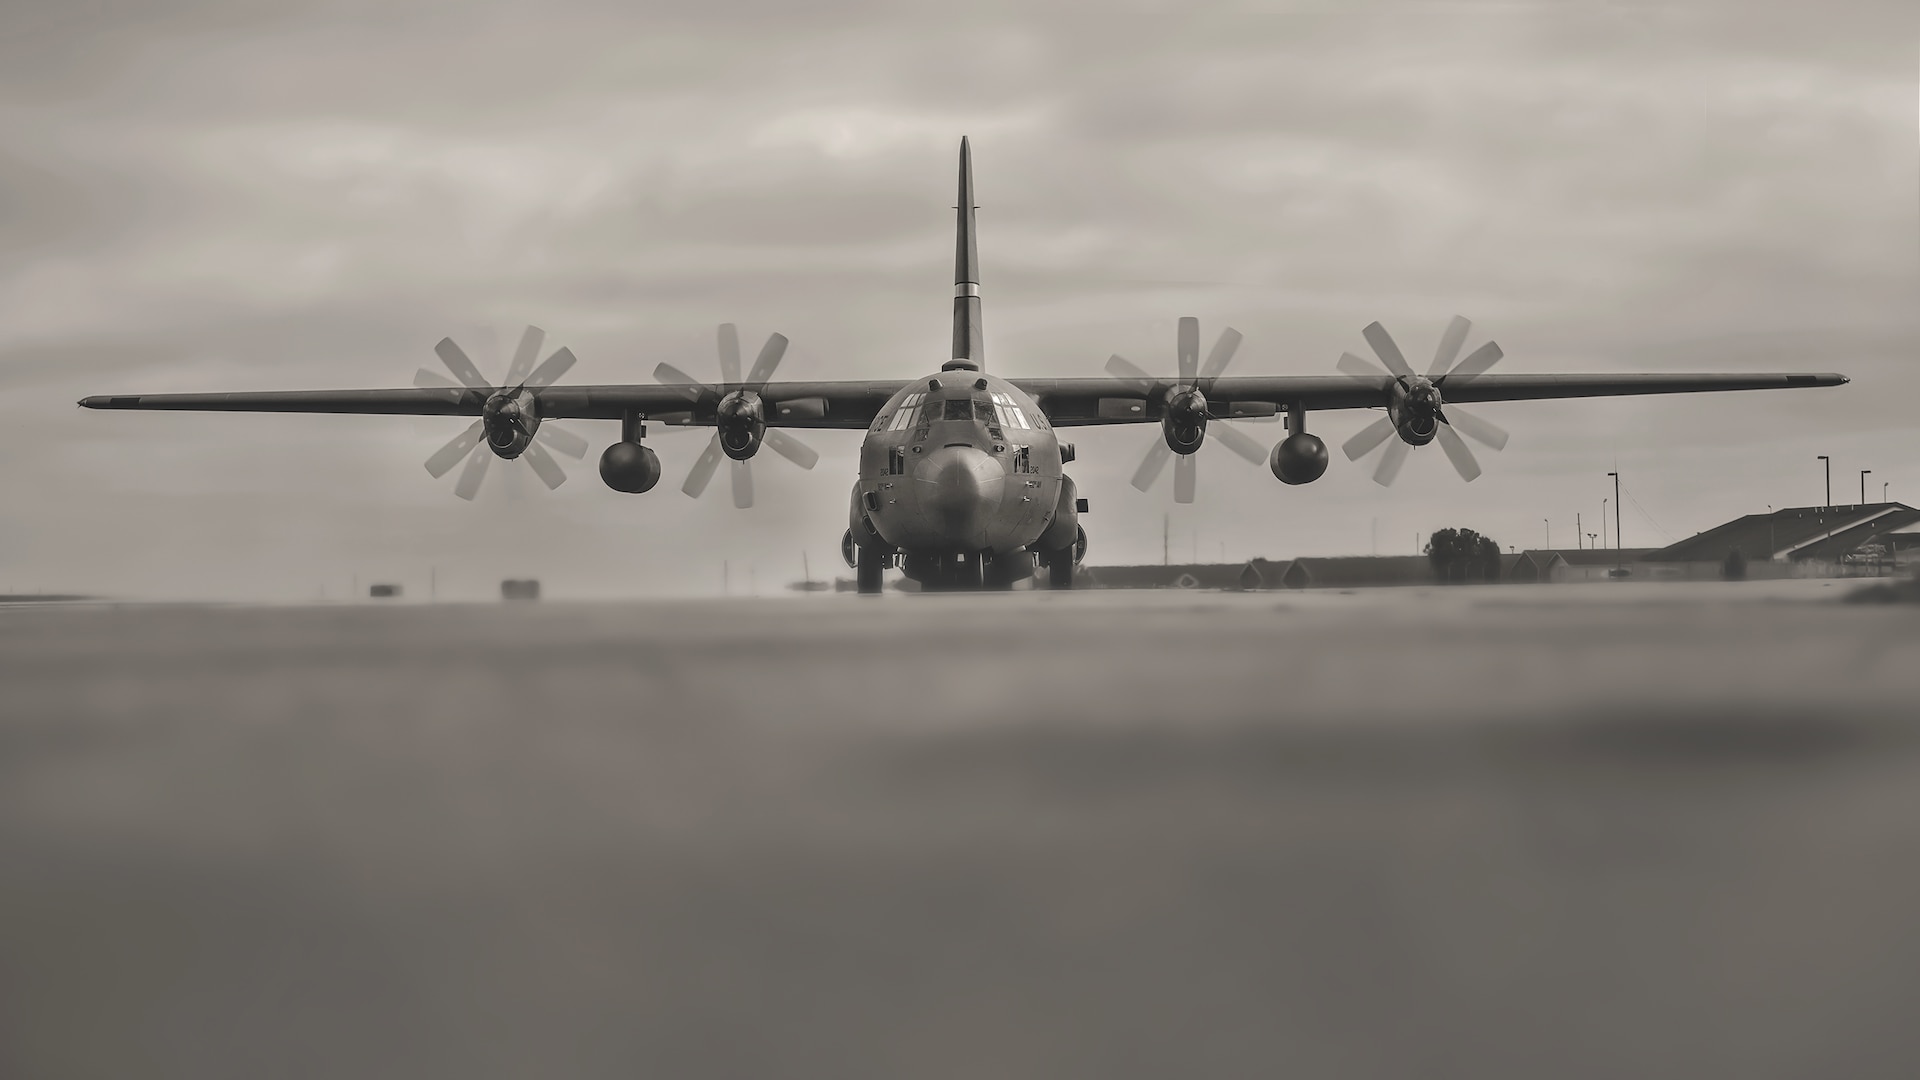 A C-130 Hercules from the Illinois National Guard’s 182nd Airlift Wing based in Peoria, lands at the Marion Airport in Marion, Illinois, during Prairie Assurance, a full-scale, statewide multi-agency exercise Nov. 2, 2018. Soldiers and Airmen from the Illinois National Guard exercised at multiple locations in the state with state agencies, county emergency management agencies and the Illinois Emergency Management Agency to test interoperability during a large-scale catastrophic event.